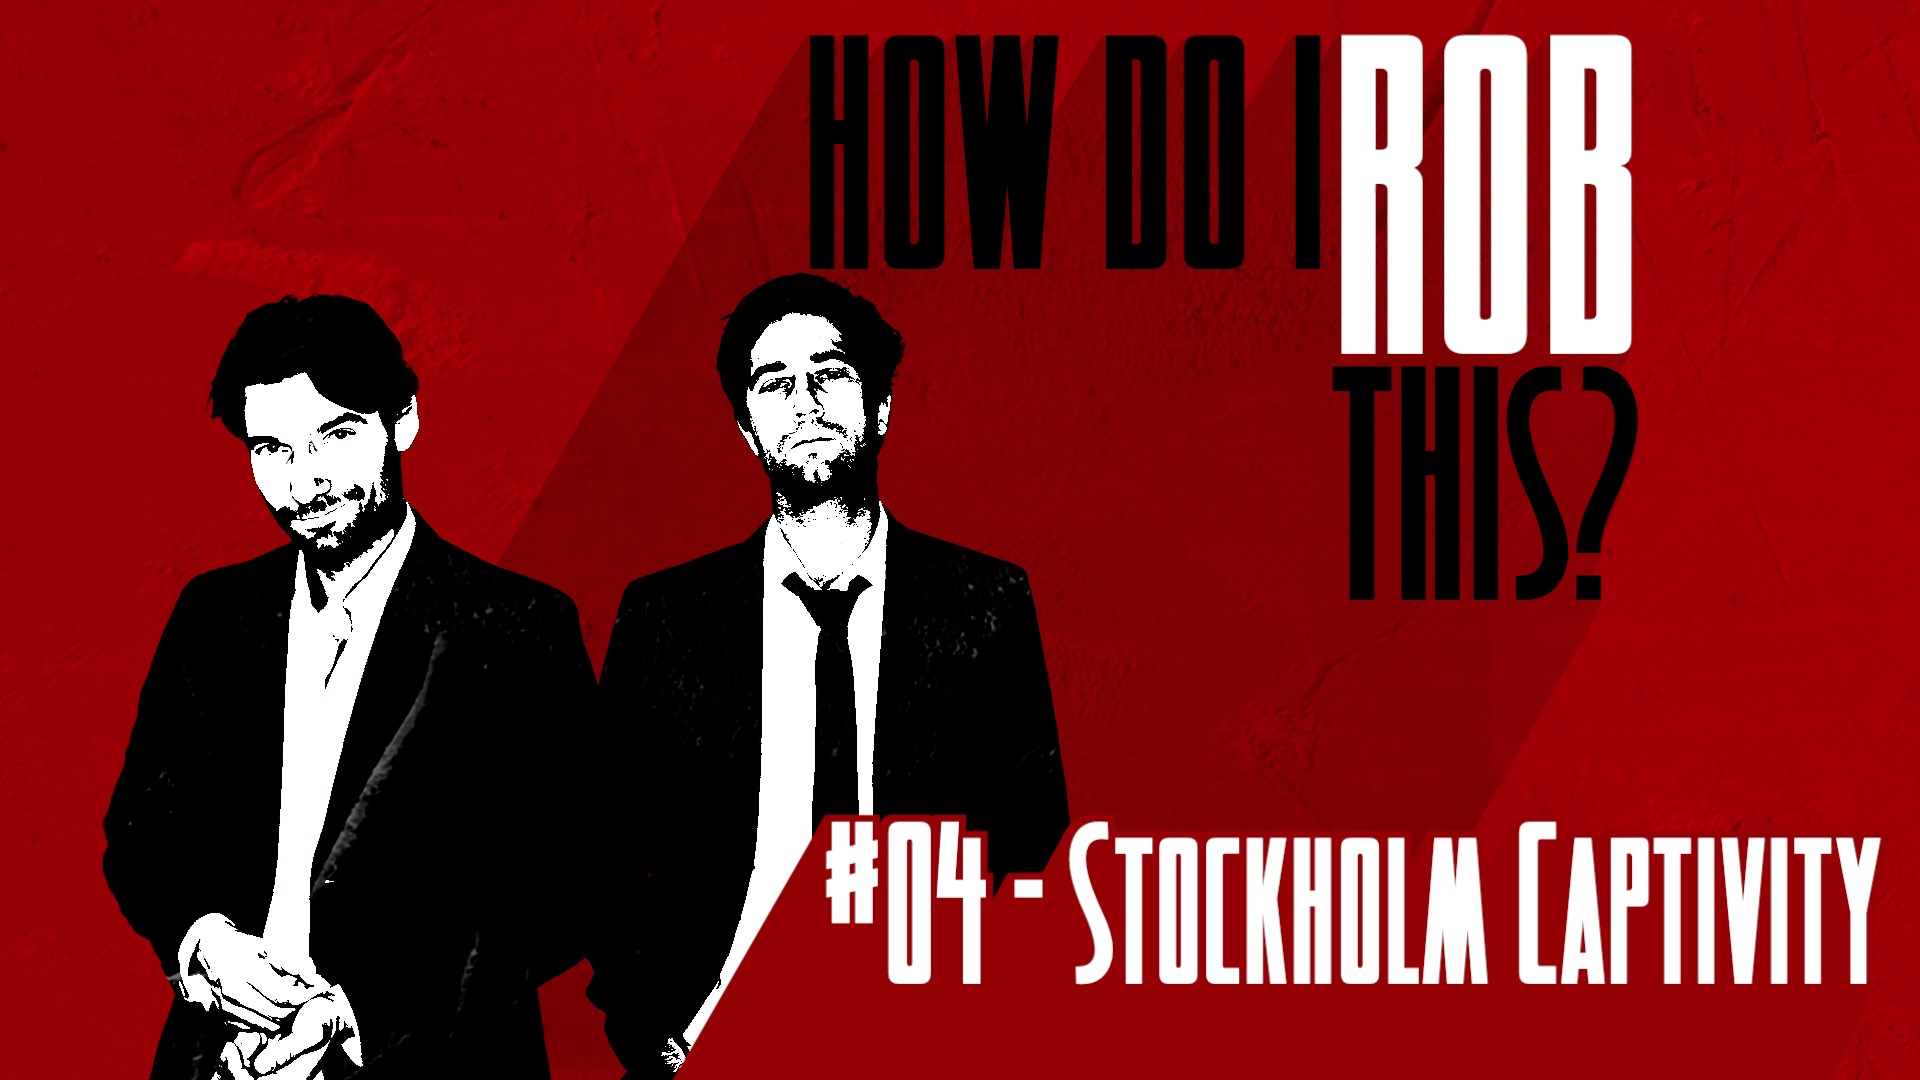 __How Do I Rob This_TITLE_04 STOCKHOLM.jpg